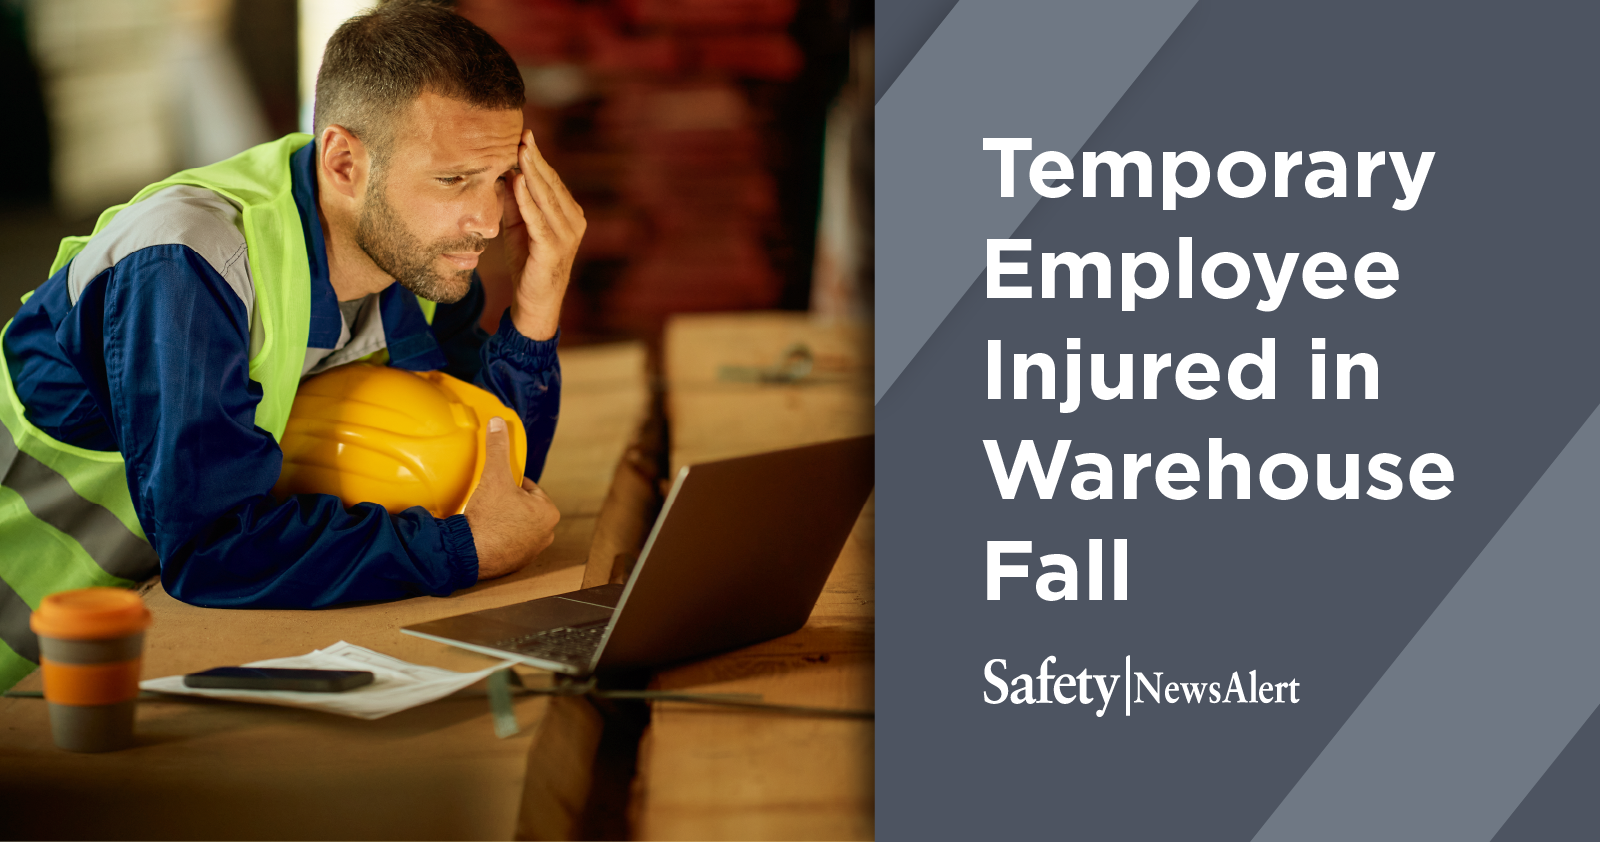 Temporary Employee injured in warehouse fall